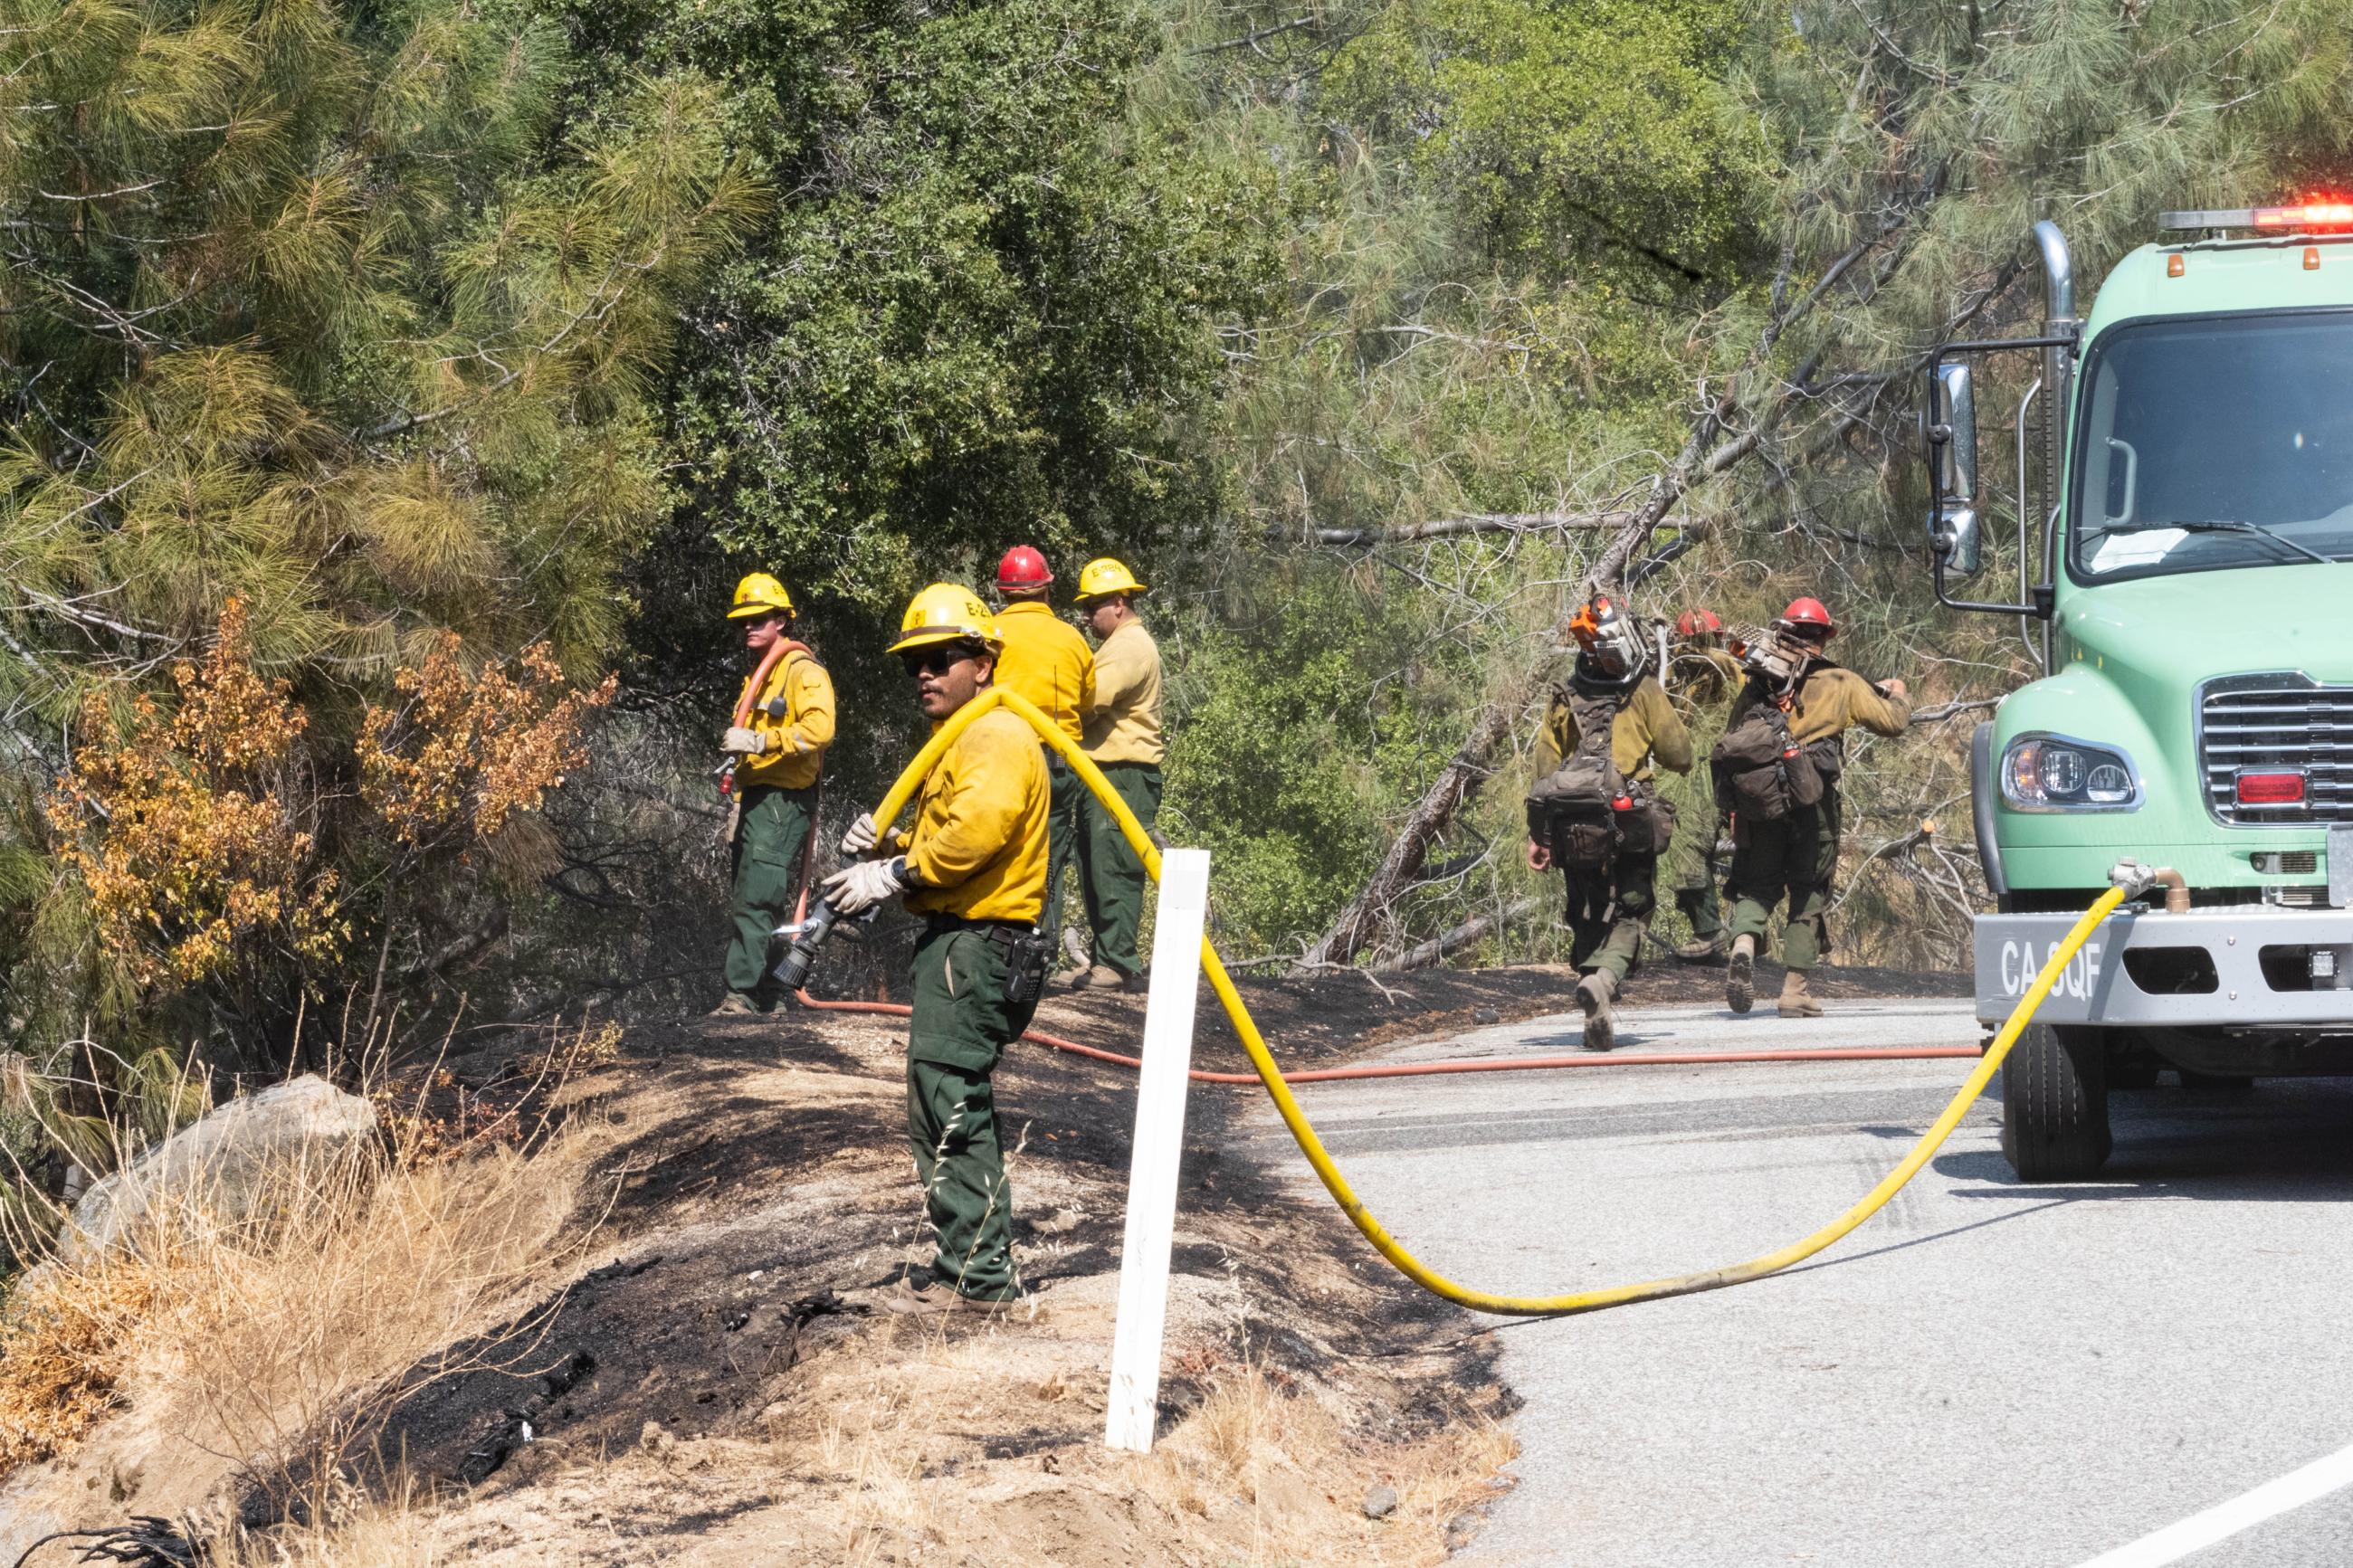 Firefighters stand on burned ground next to a road. Some are walking down the road carrying tools while others hold hoses that are connected to a fire engine.